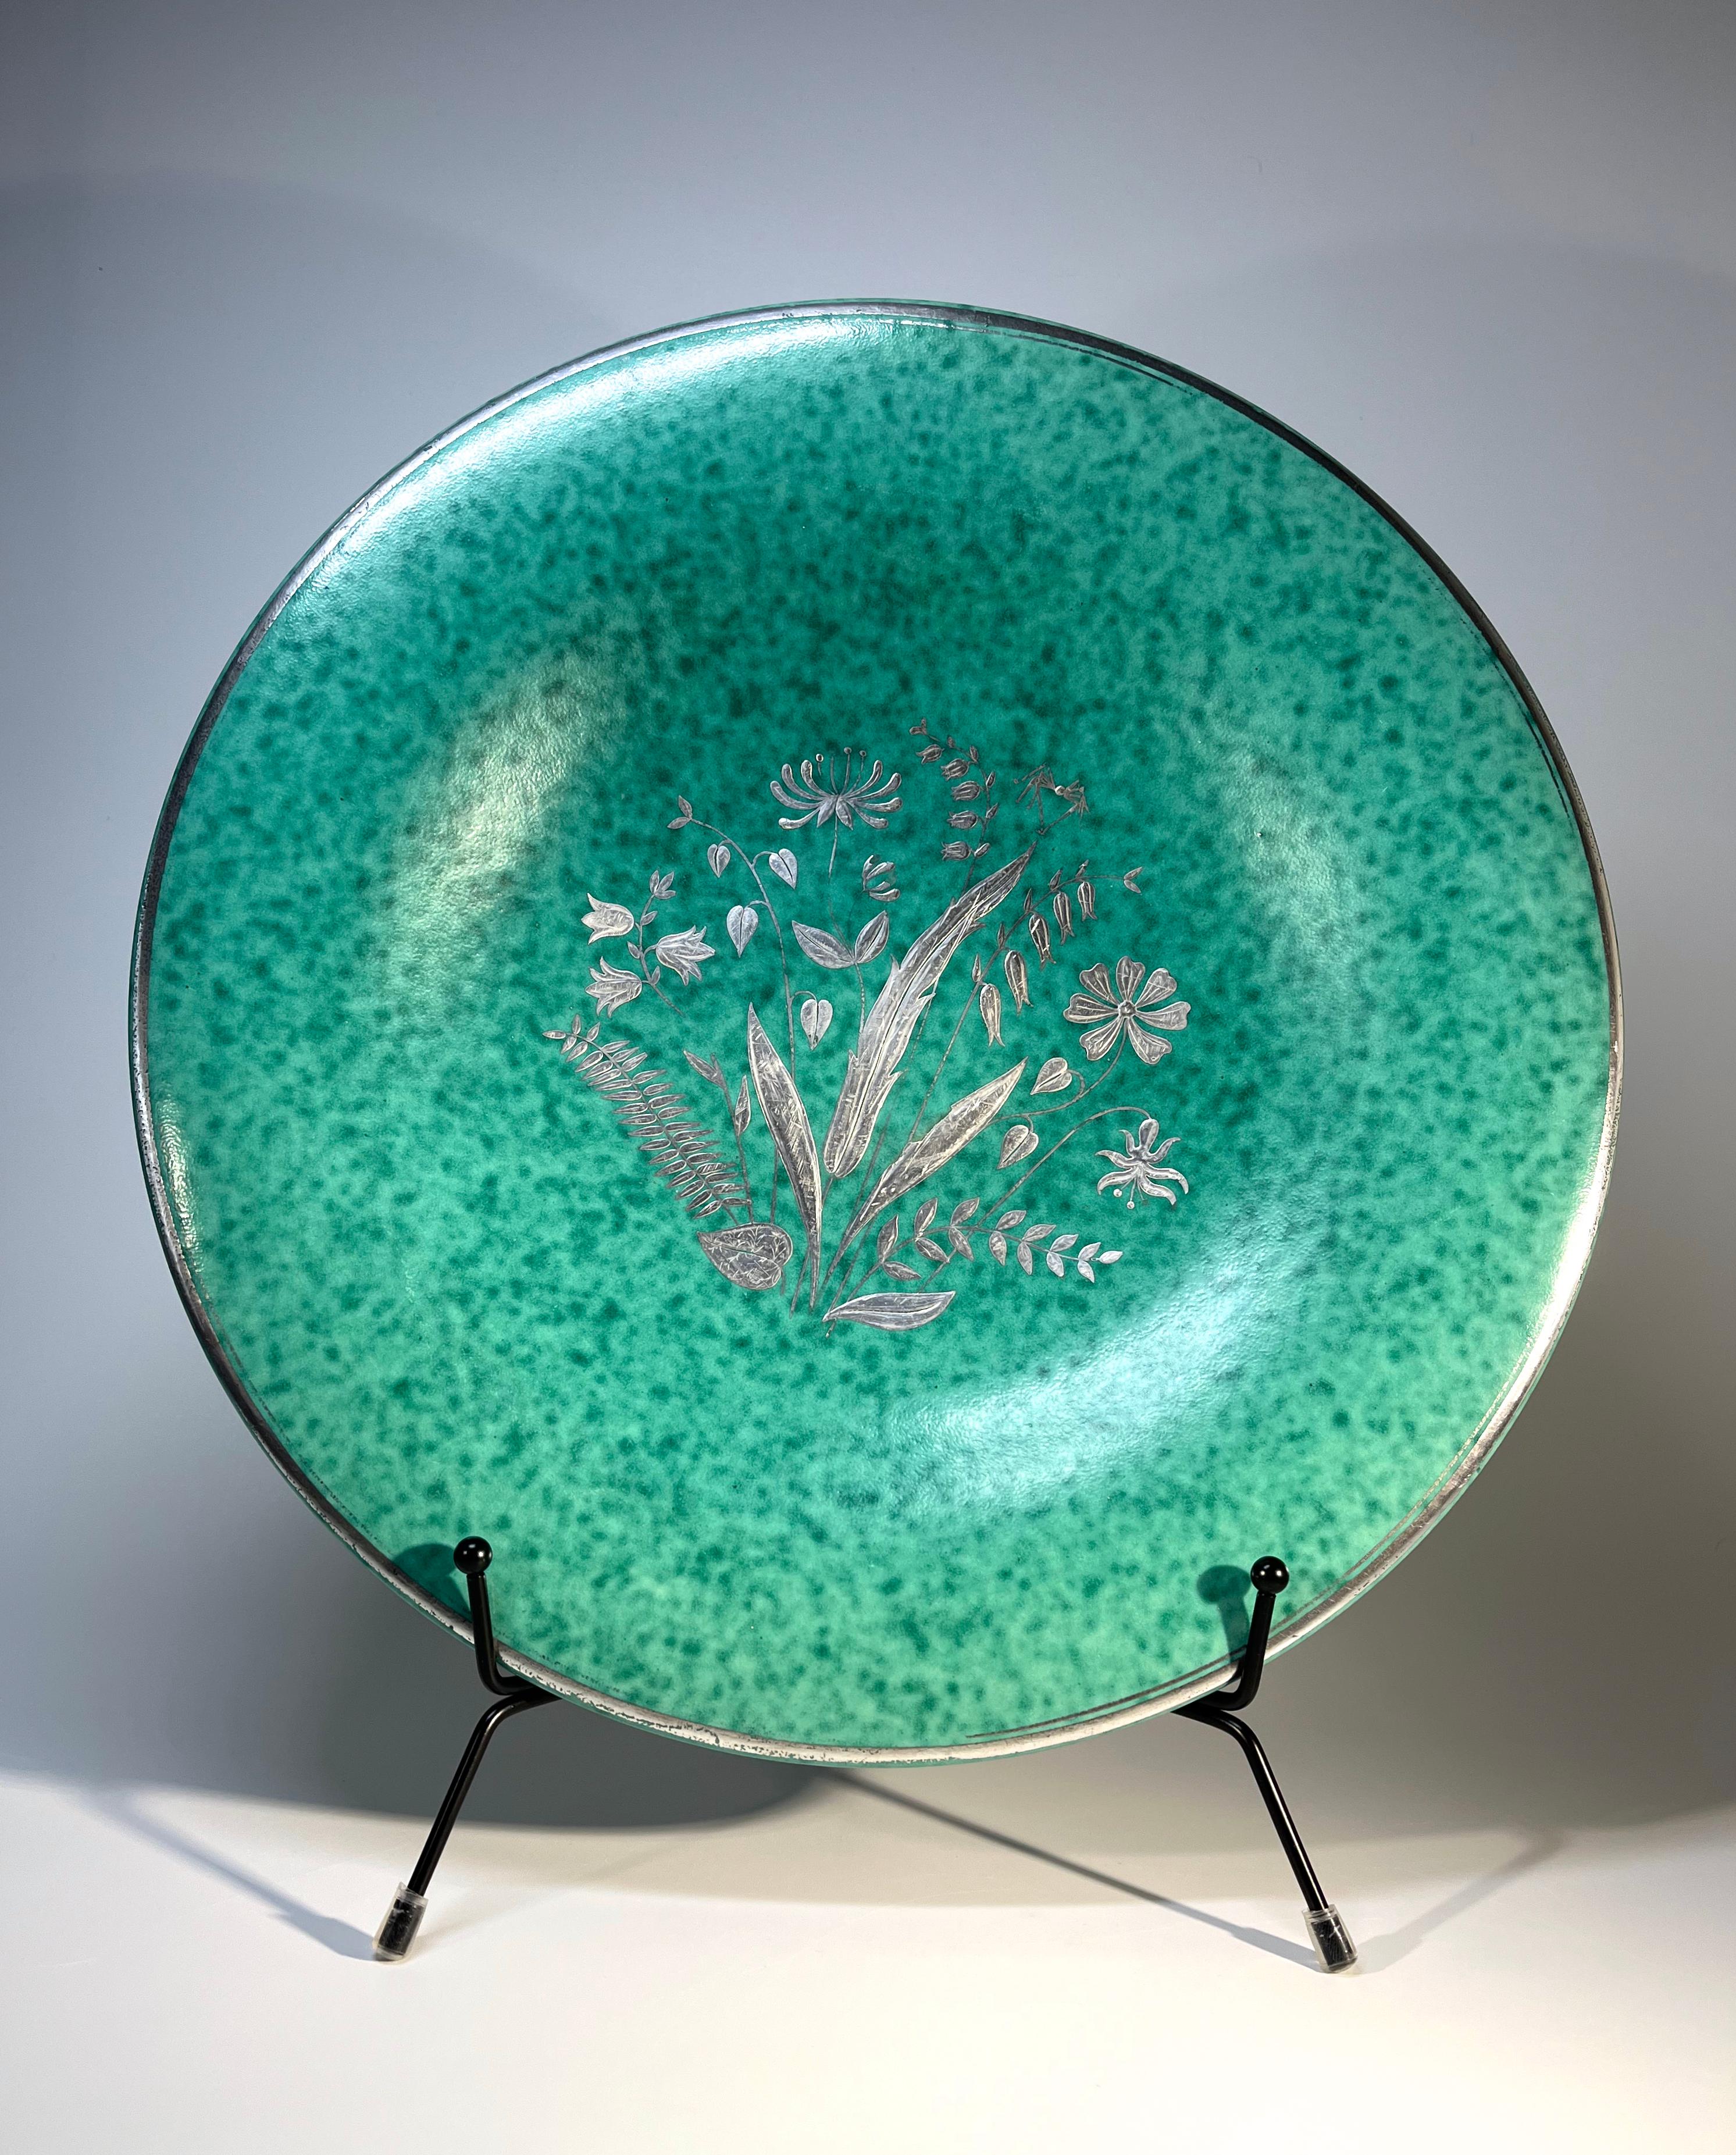 Floral round stoneware centrepiece Argenta platter by Wilhelm Kage for Gustavsberg
Applied silver floral central decoration of spring flowers and foliage. 
Interesting folly: Kage has placed a long legged spider atop the foliage
The outer rim has a